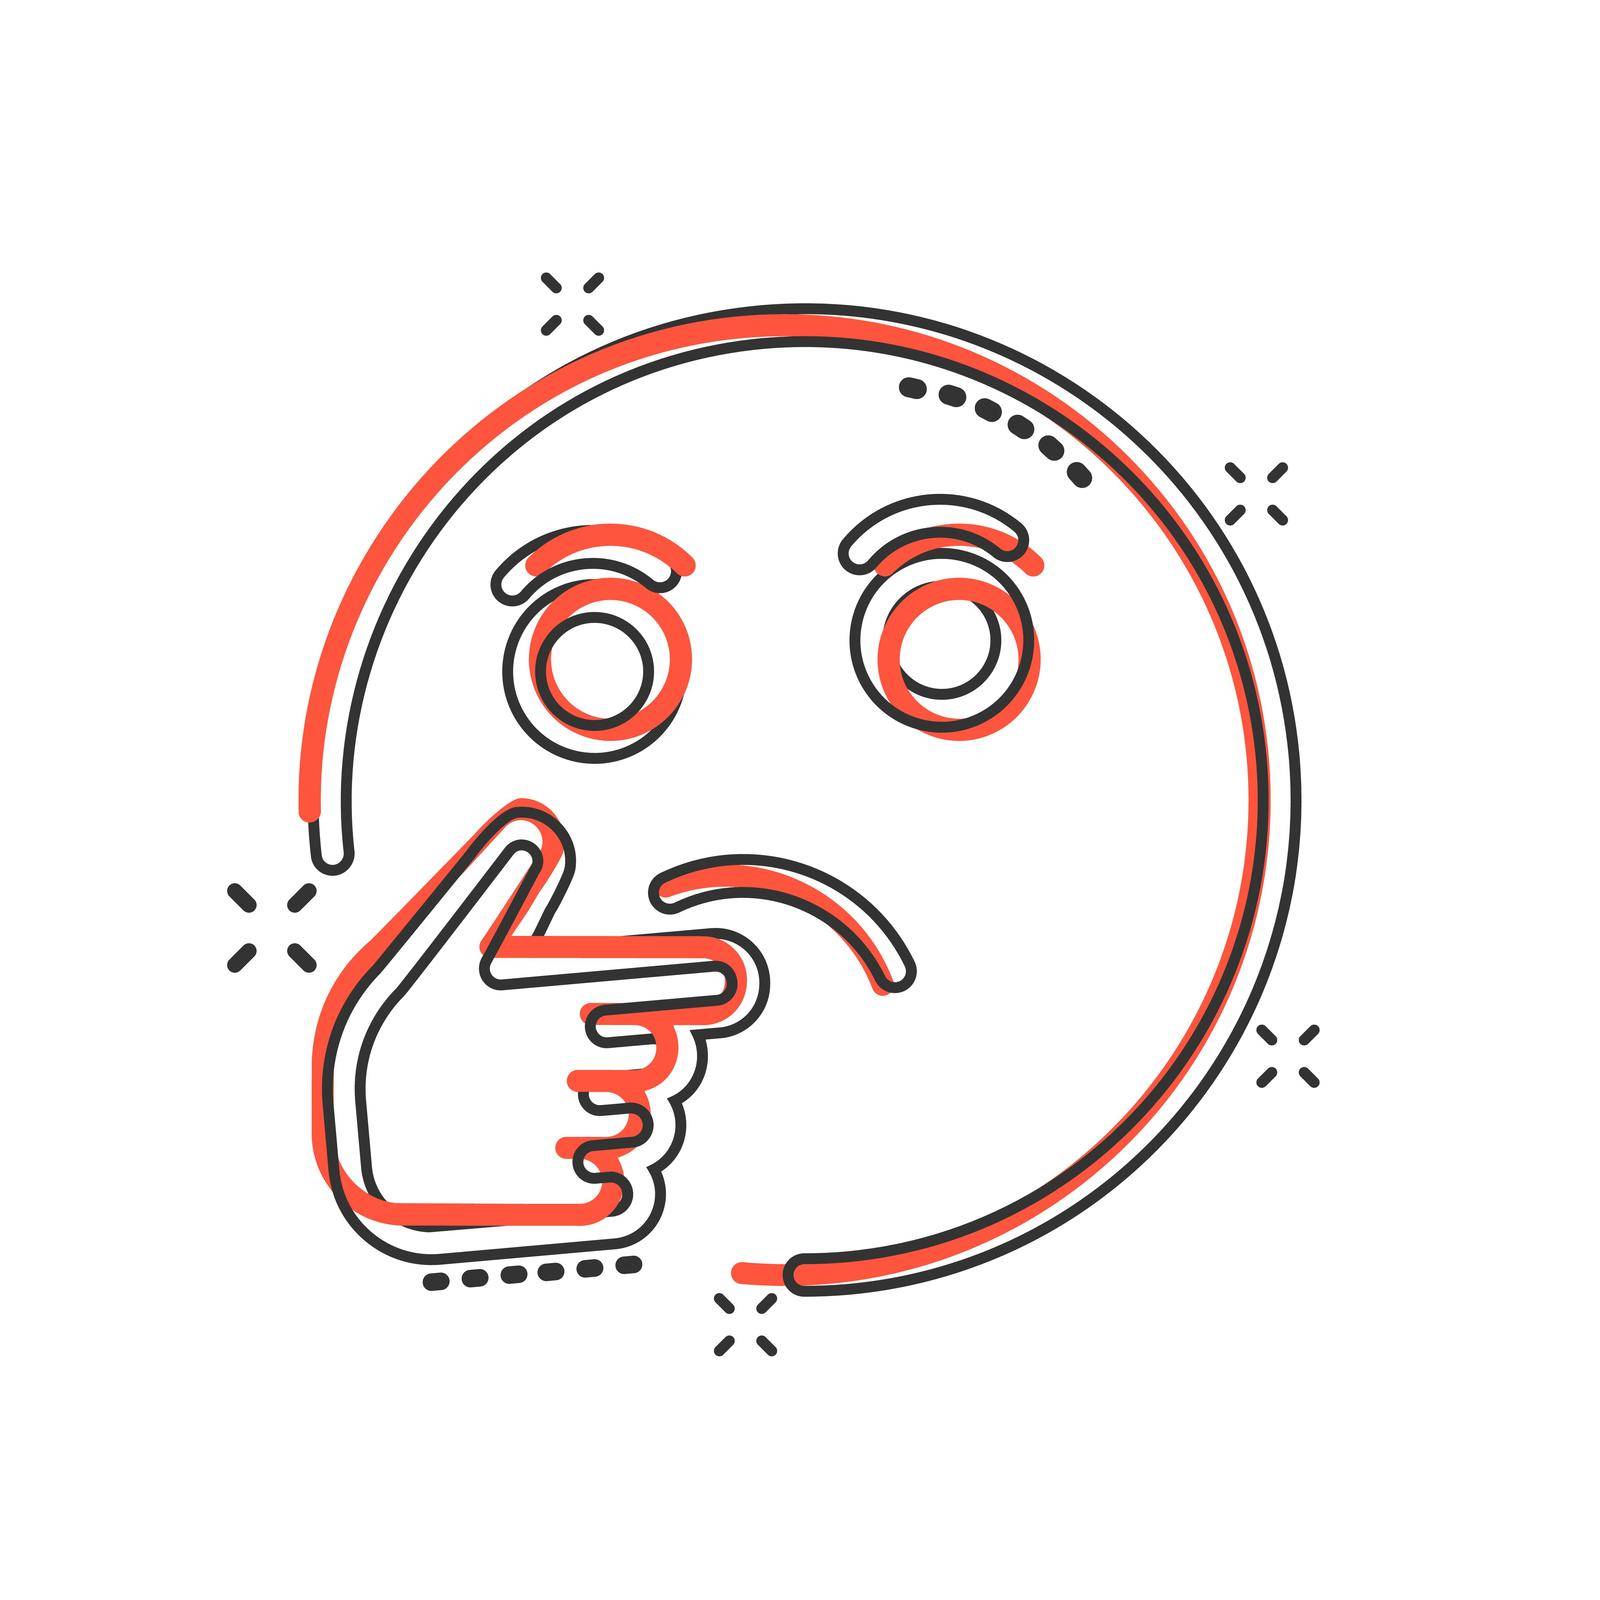 Thinking face icon in comic style. Smile emoticon vector cartoon illustration on white isolated background. Character splash effect business concept.